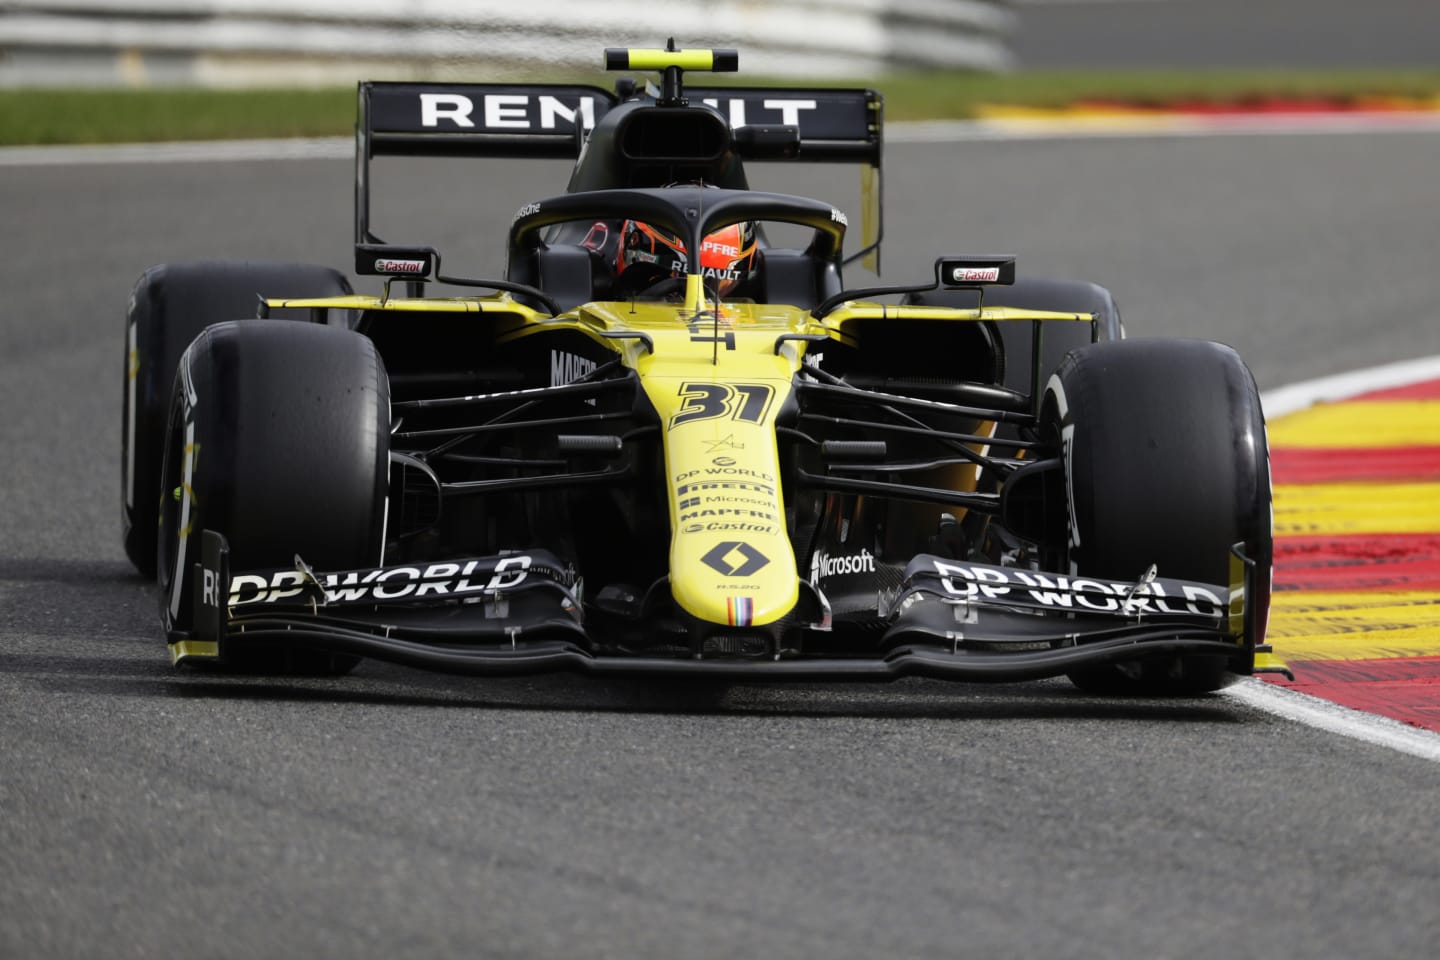 SPA, BELGIUM - AUGUST 28: Esteban Ocon of France driving the (31) Renault Sport Formula One Team RS20 on track during practice for the F1 Grand Prix of Belgium at Circuit de Spa-Francorchamps on August 28, 2020 in Spa, Belgium. (Photo by Stephanie Lecocq/Pool via Getty Images)